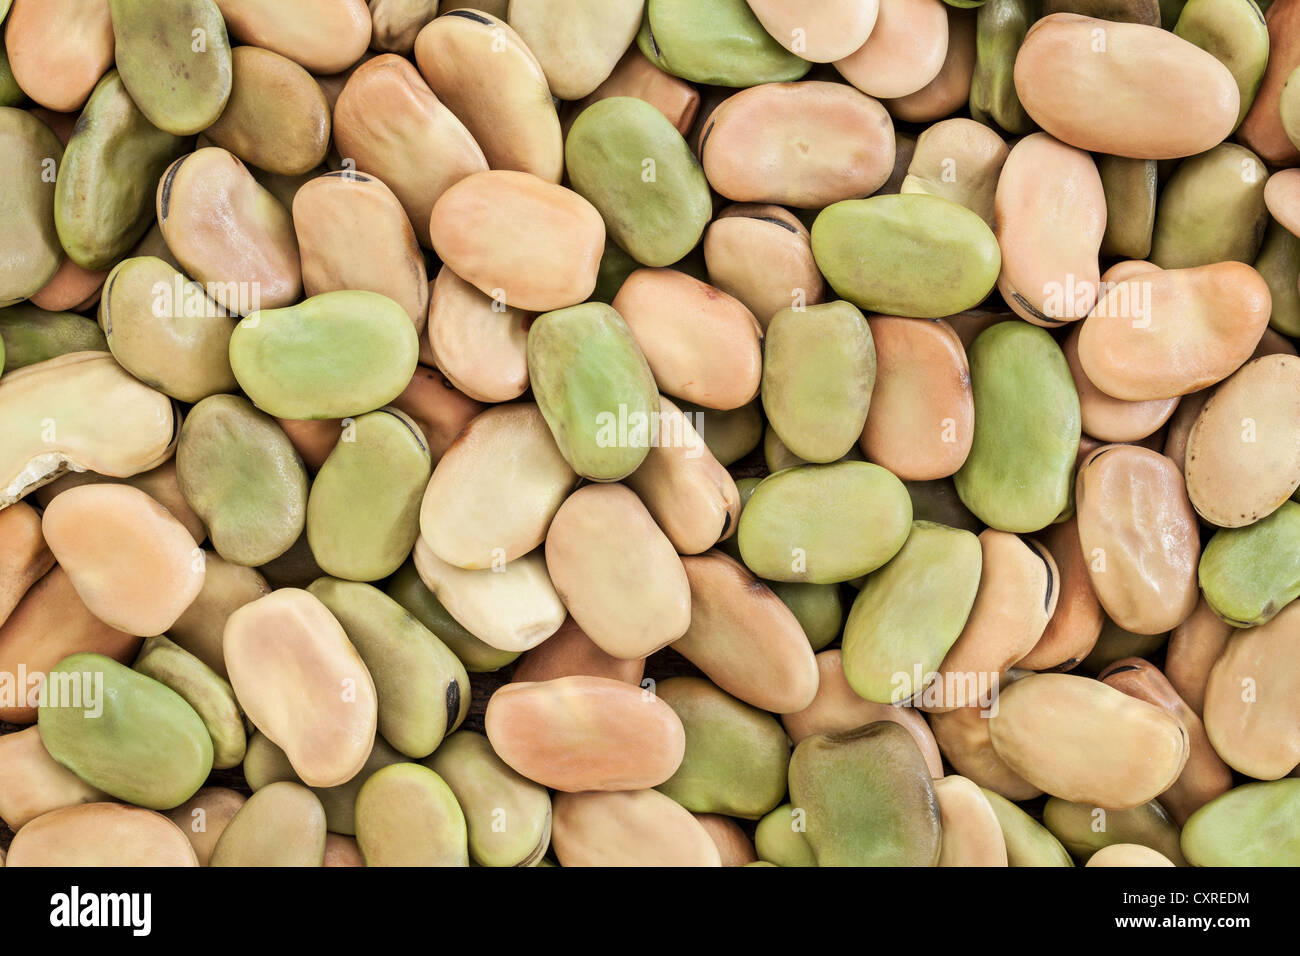 background and texture of dried fava (broad) bean Stock Photo